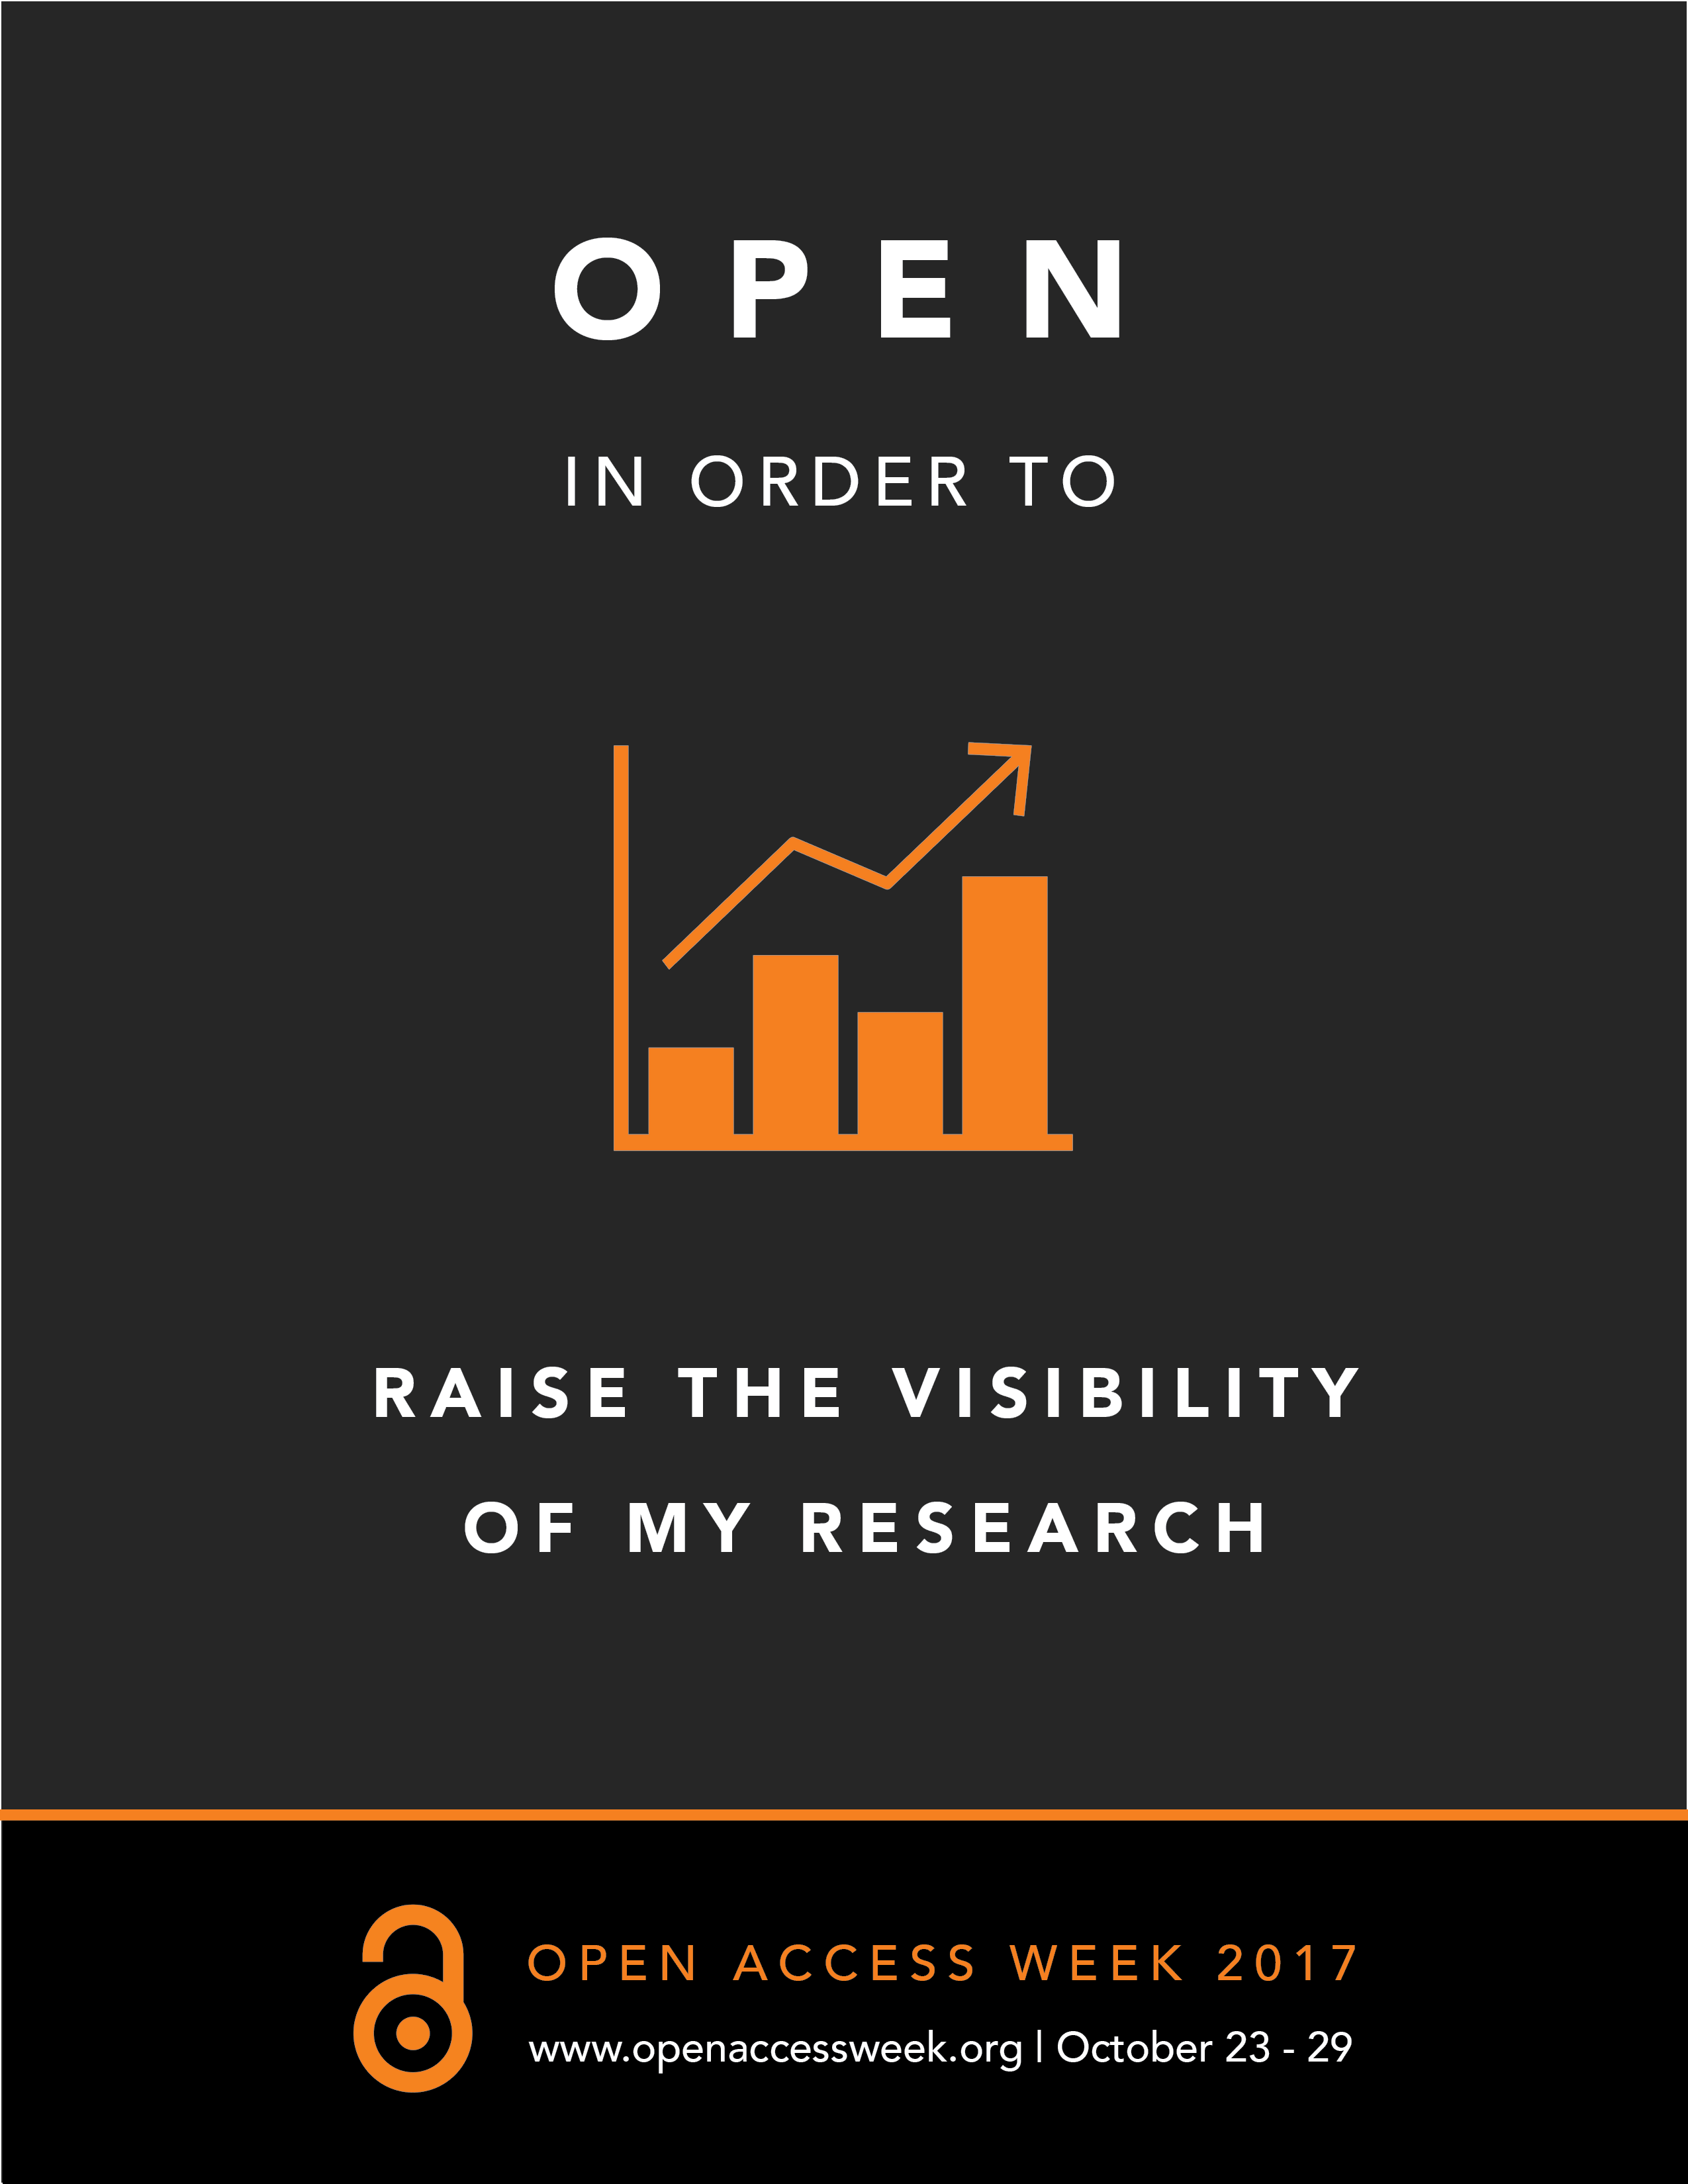 Poster: "Open in order to... raise the visibility of my research. Open Access Week 2017. www.openaccessweek.org | October 23-29"